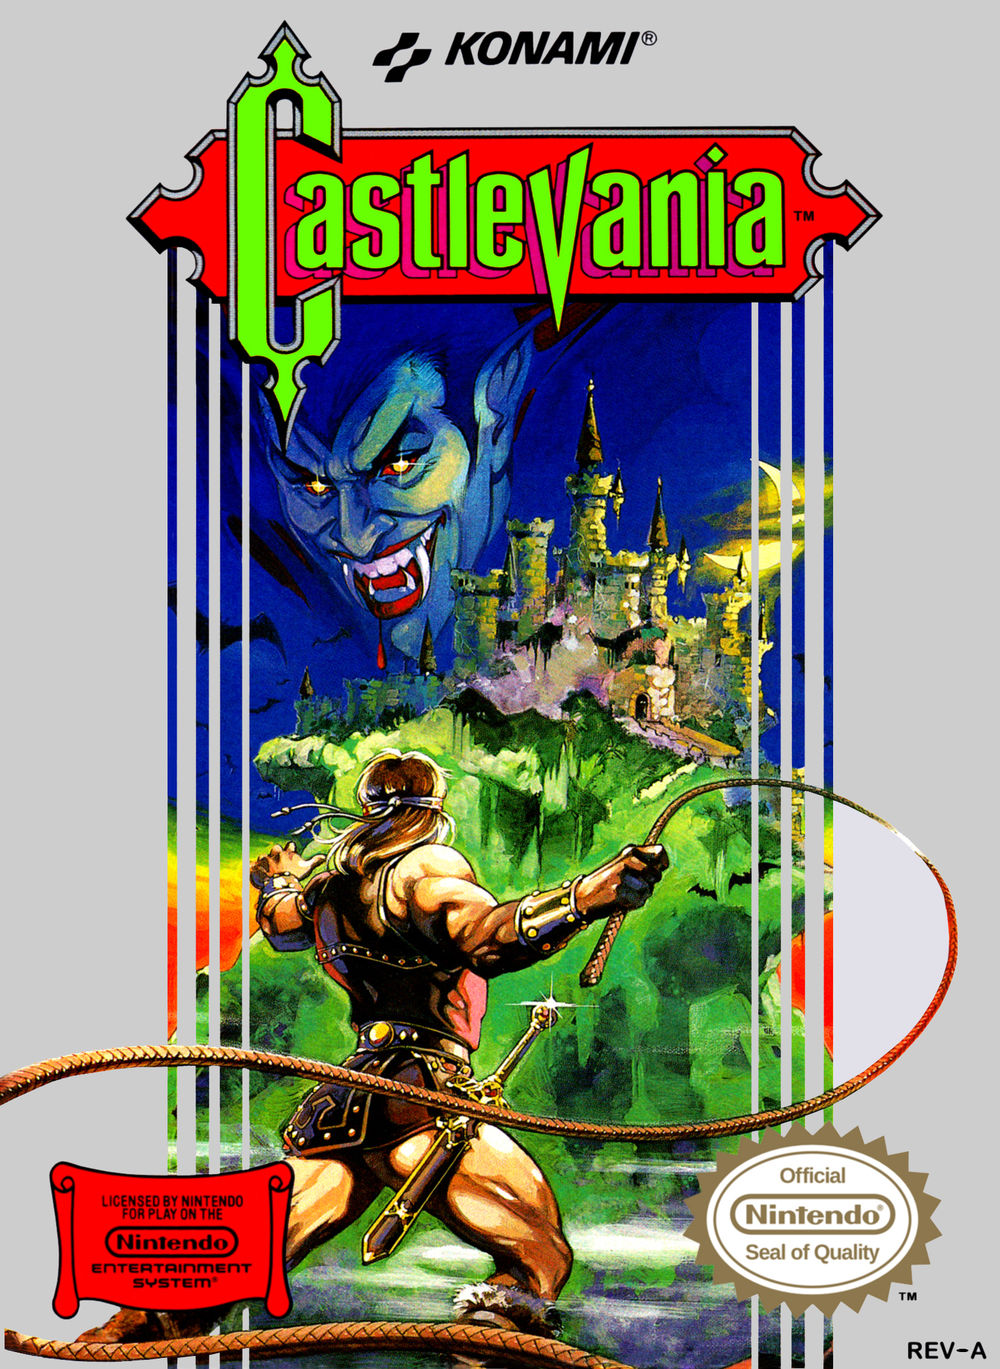 Cover of the first Nintendo Castlevania game, featuring Simon Belmont confronting Dracula's castle, with Dracula's face superimposed on the sky.